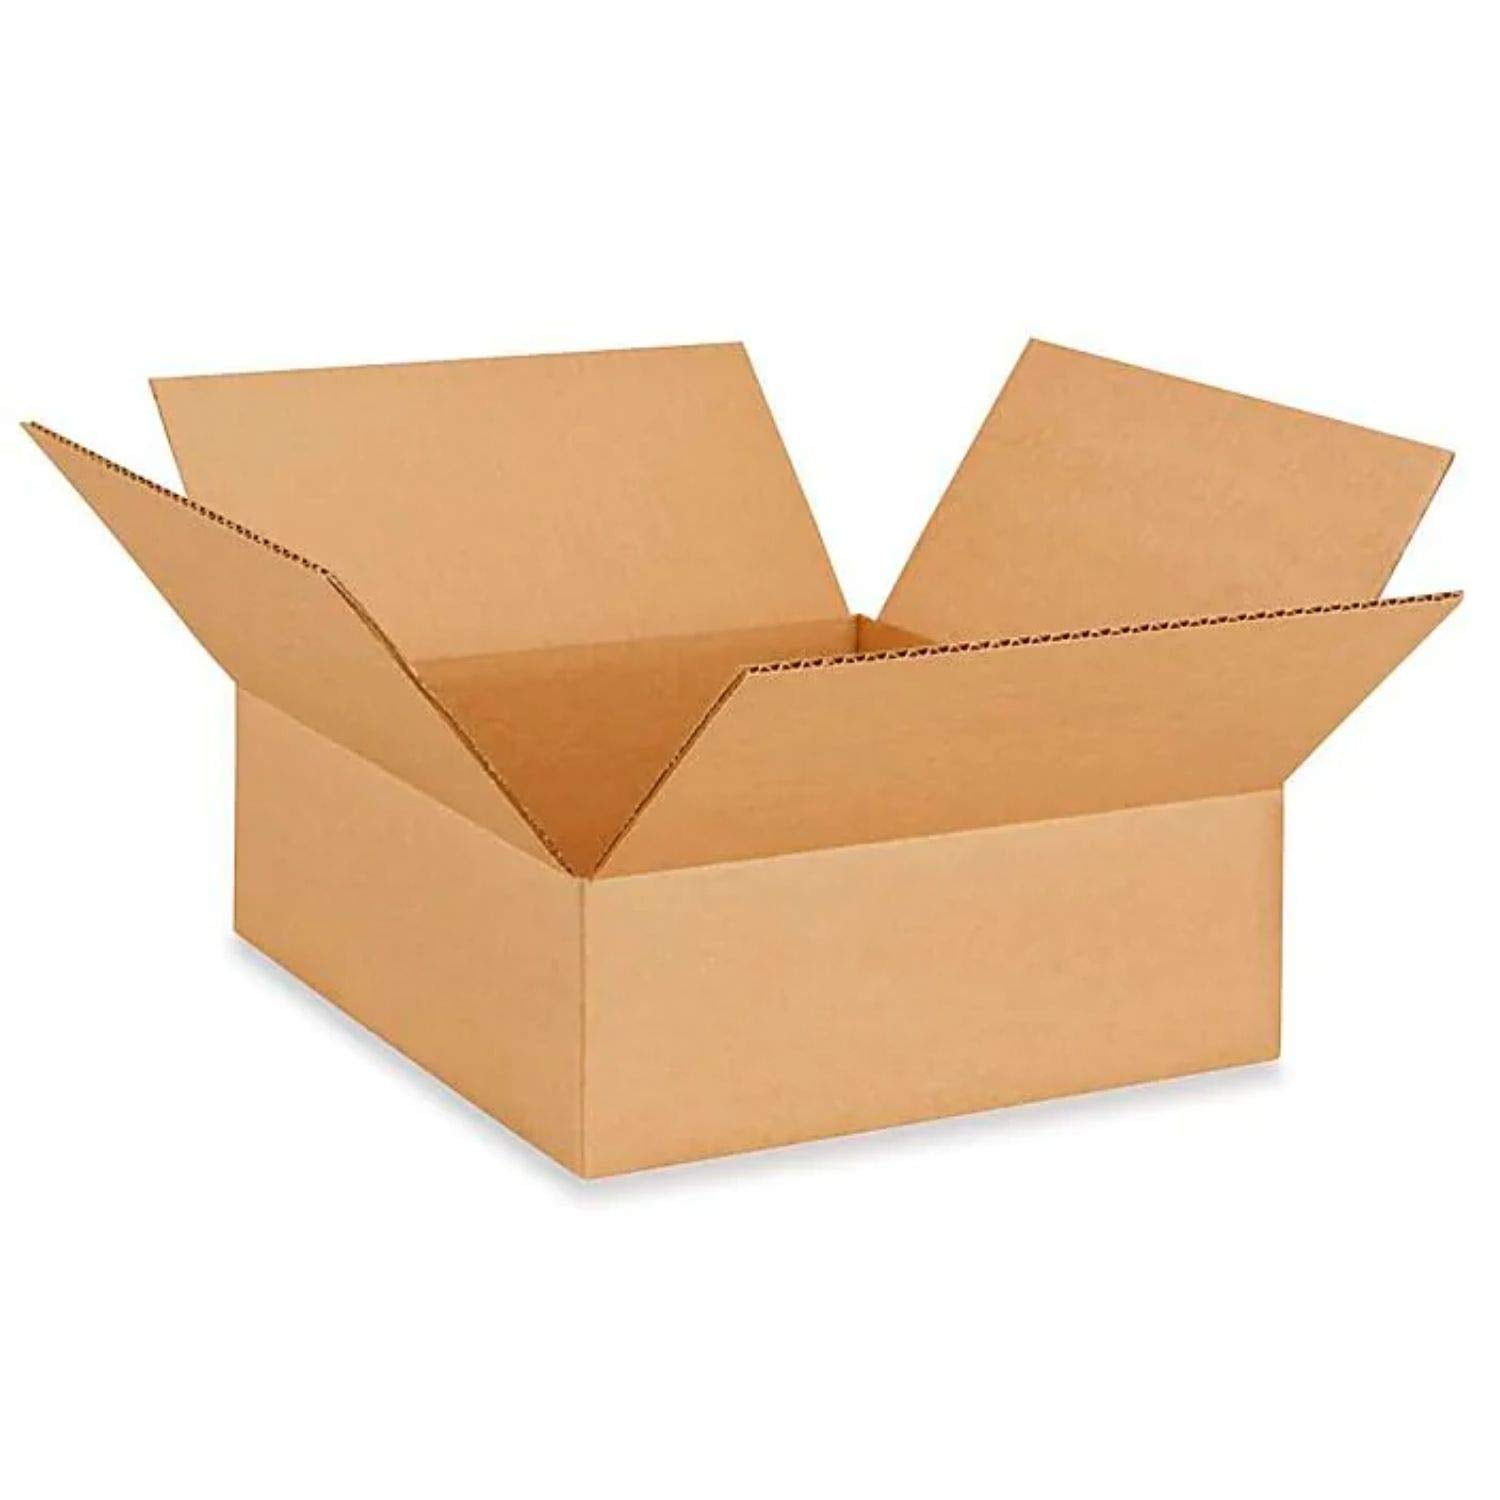 Large Shipping Boxes For Sale - 12 Premium Medium Moving Boxes 18x18x16 ...